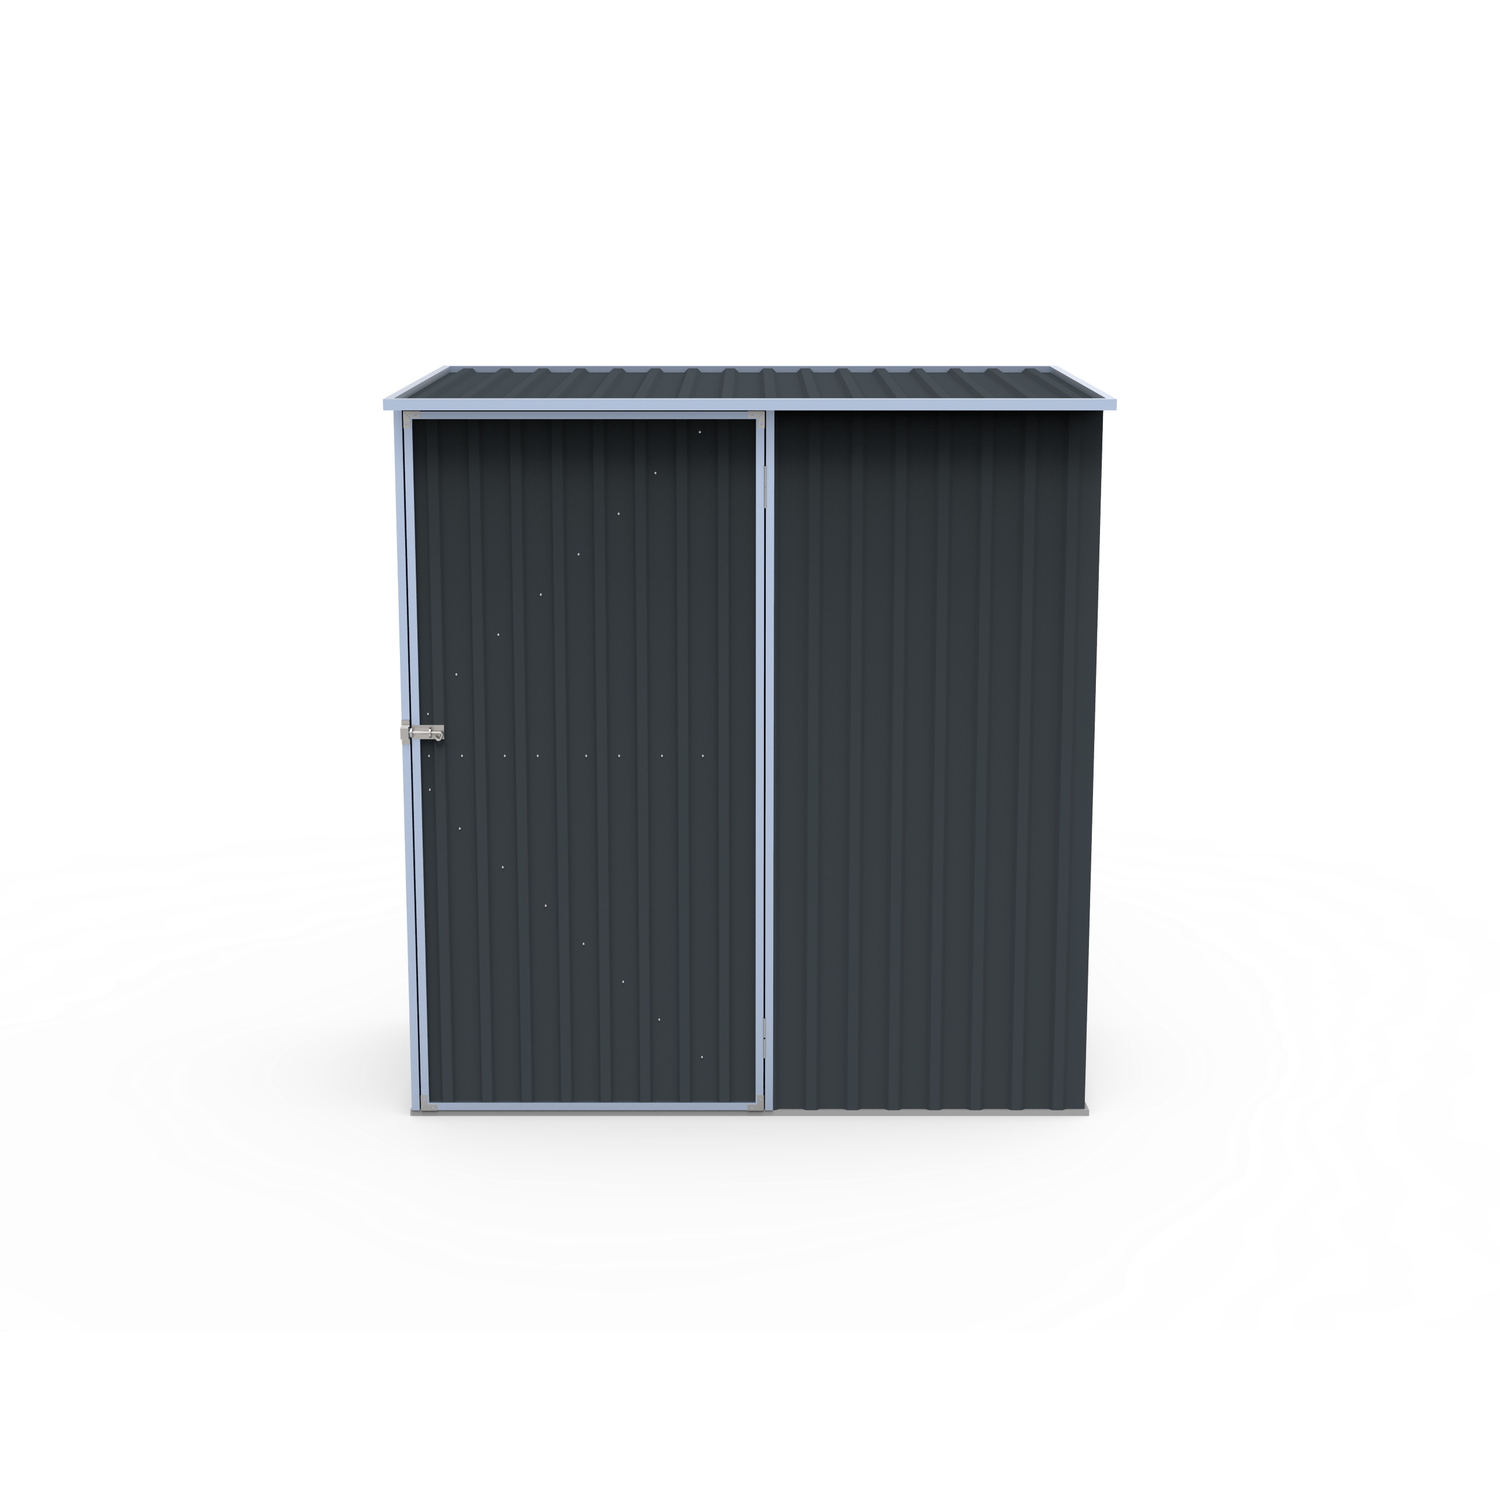 Build-Well 6 ft. x 3 ft. Metal Vertical Modern Storage Shed without Floor Kit -  BW0603SLIM-GY